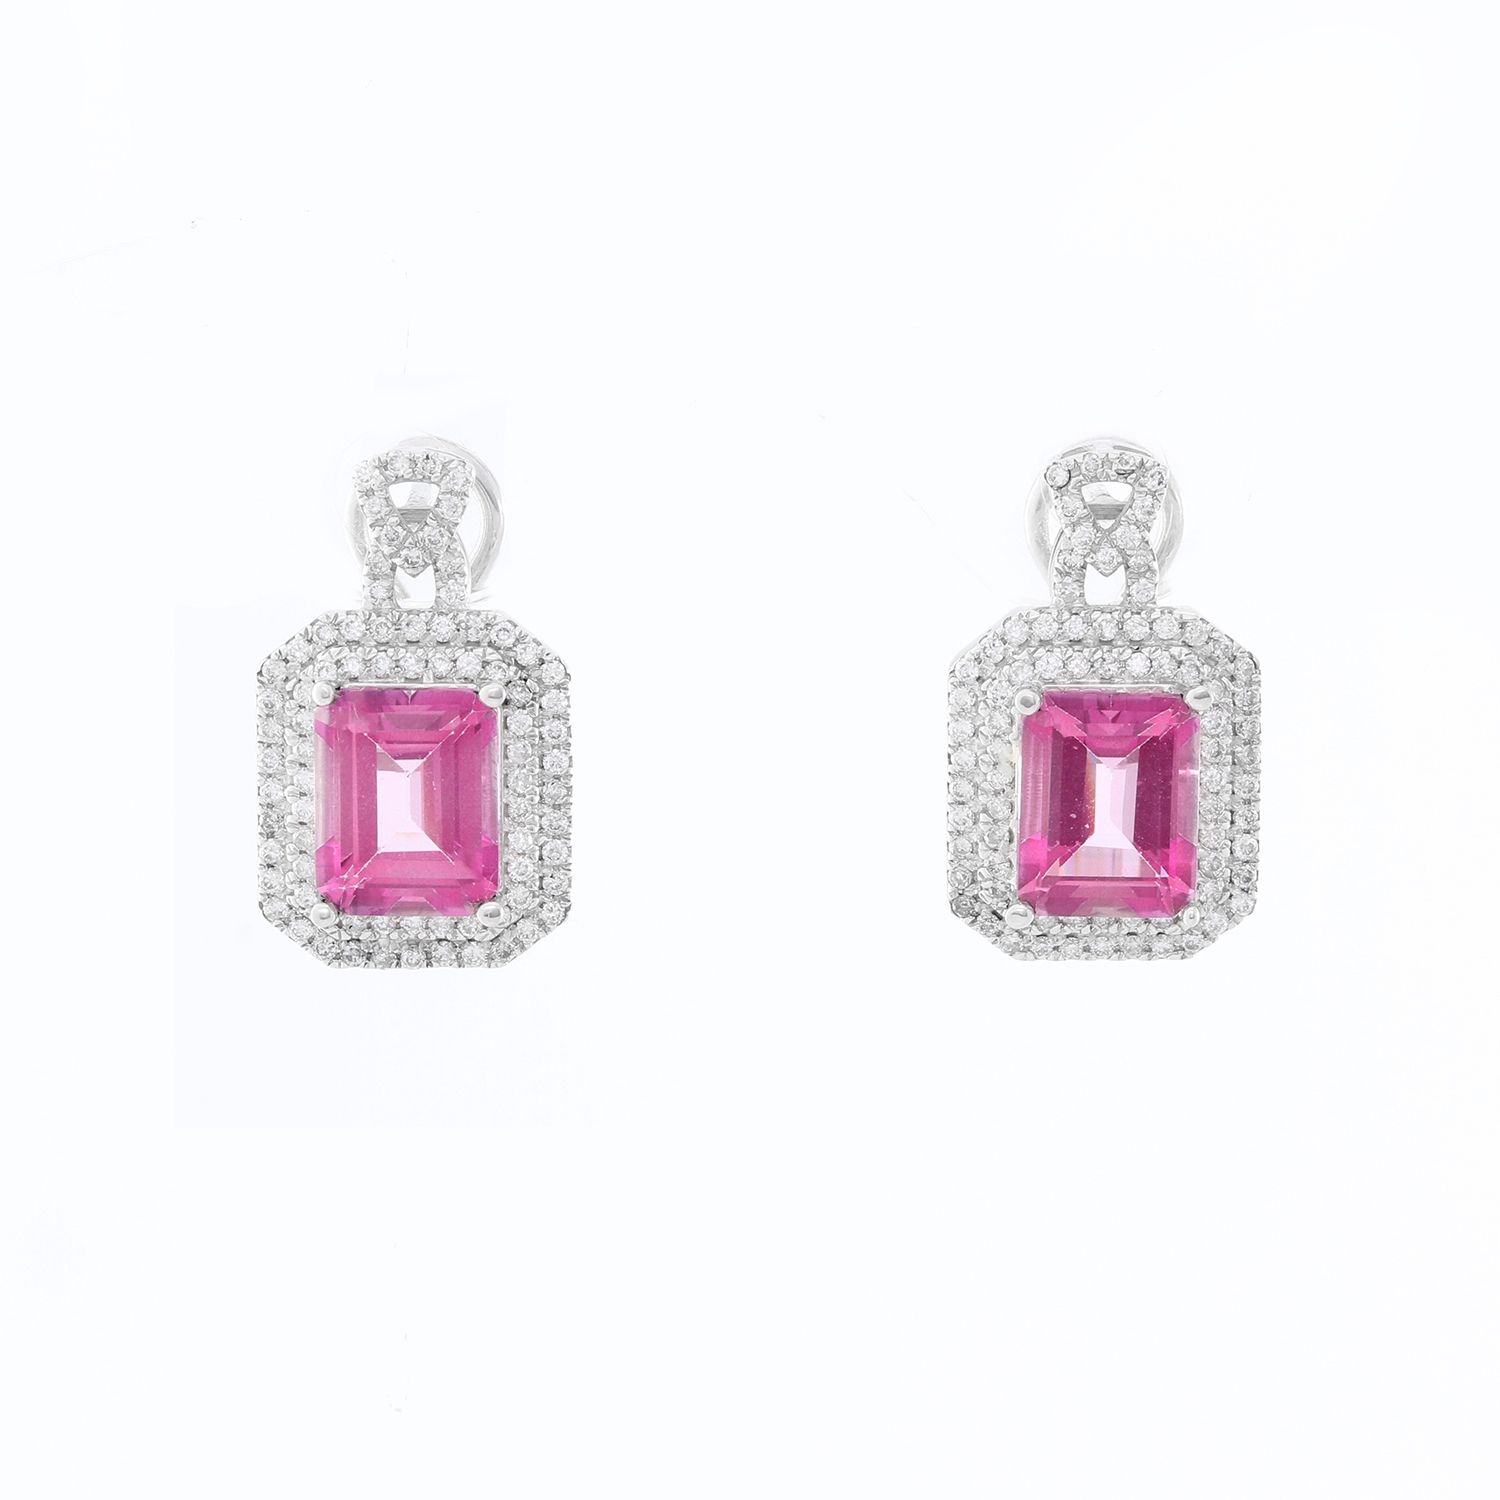 Details about   3.97 Carat 14K Solid White Gold Chandelier Earrings Diamond Pink Topaz 